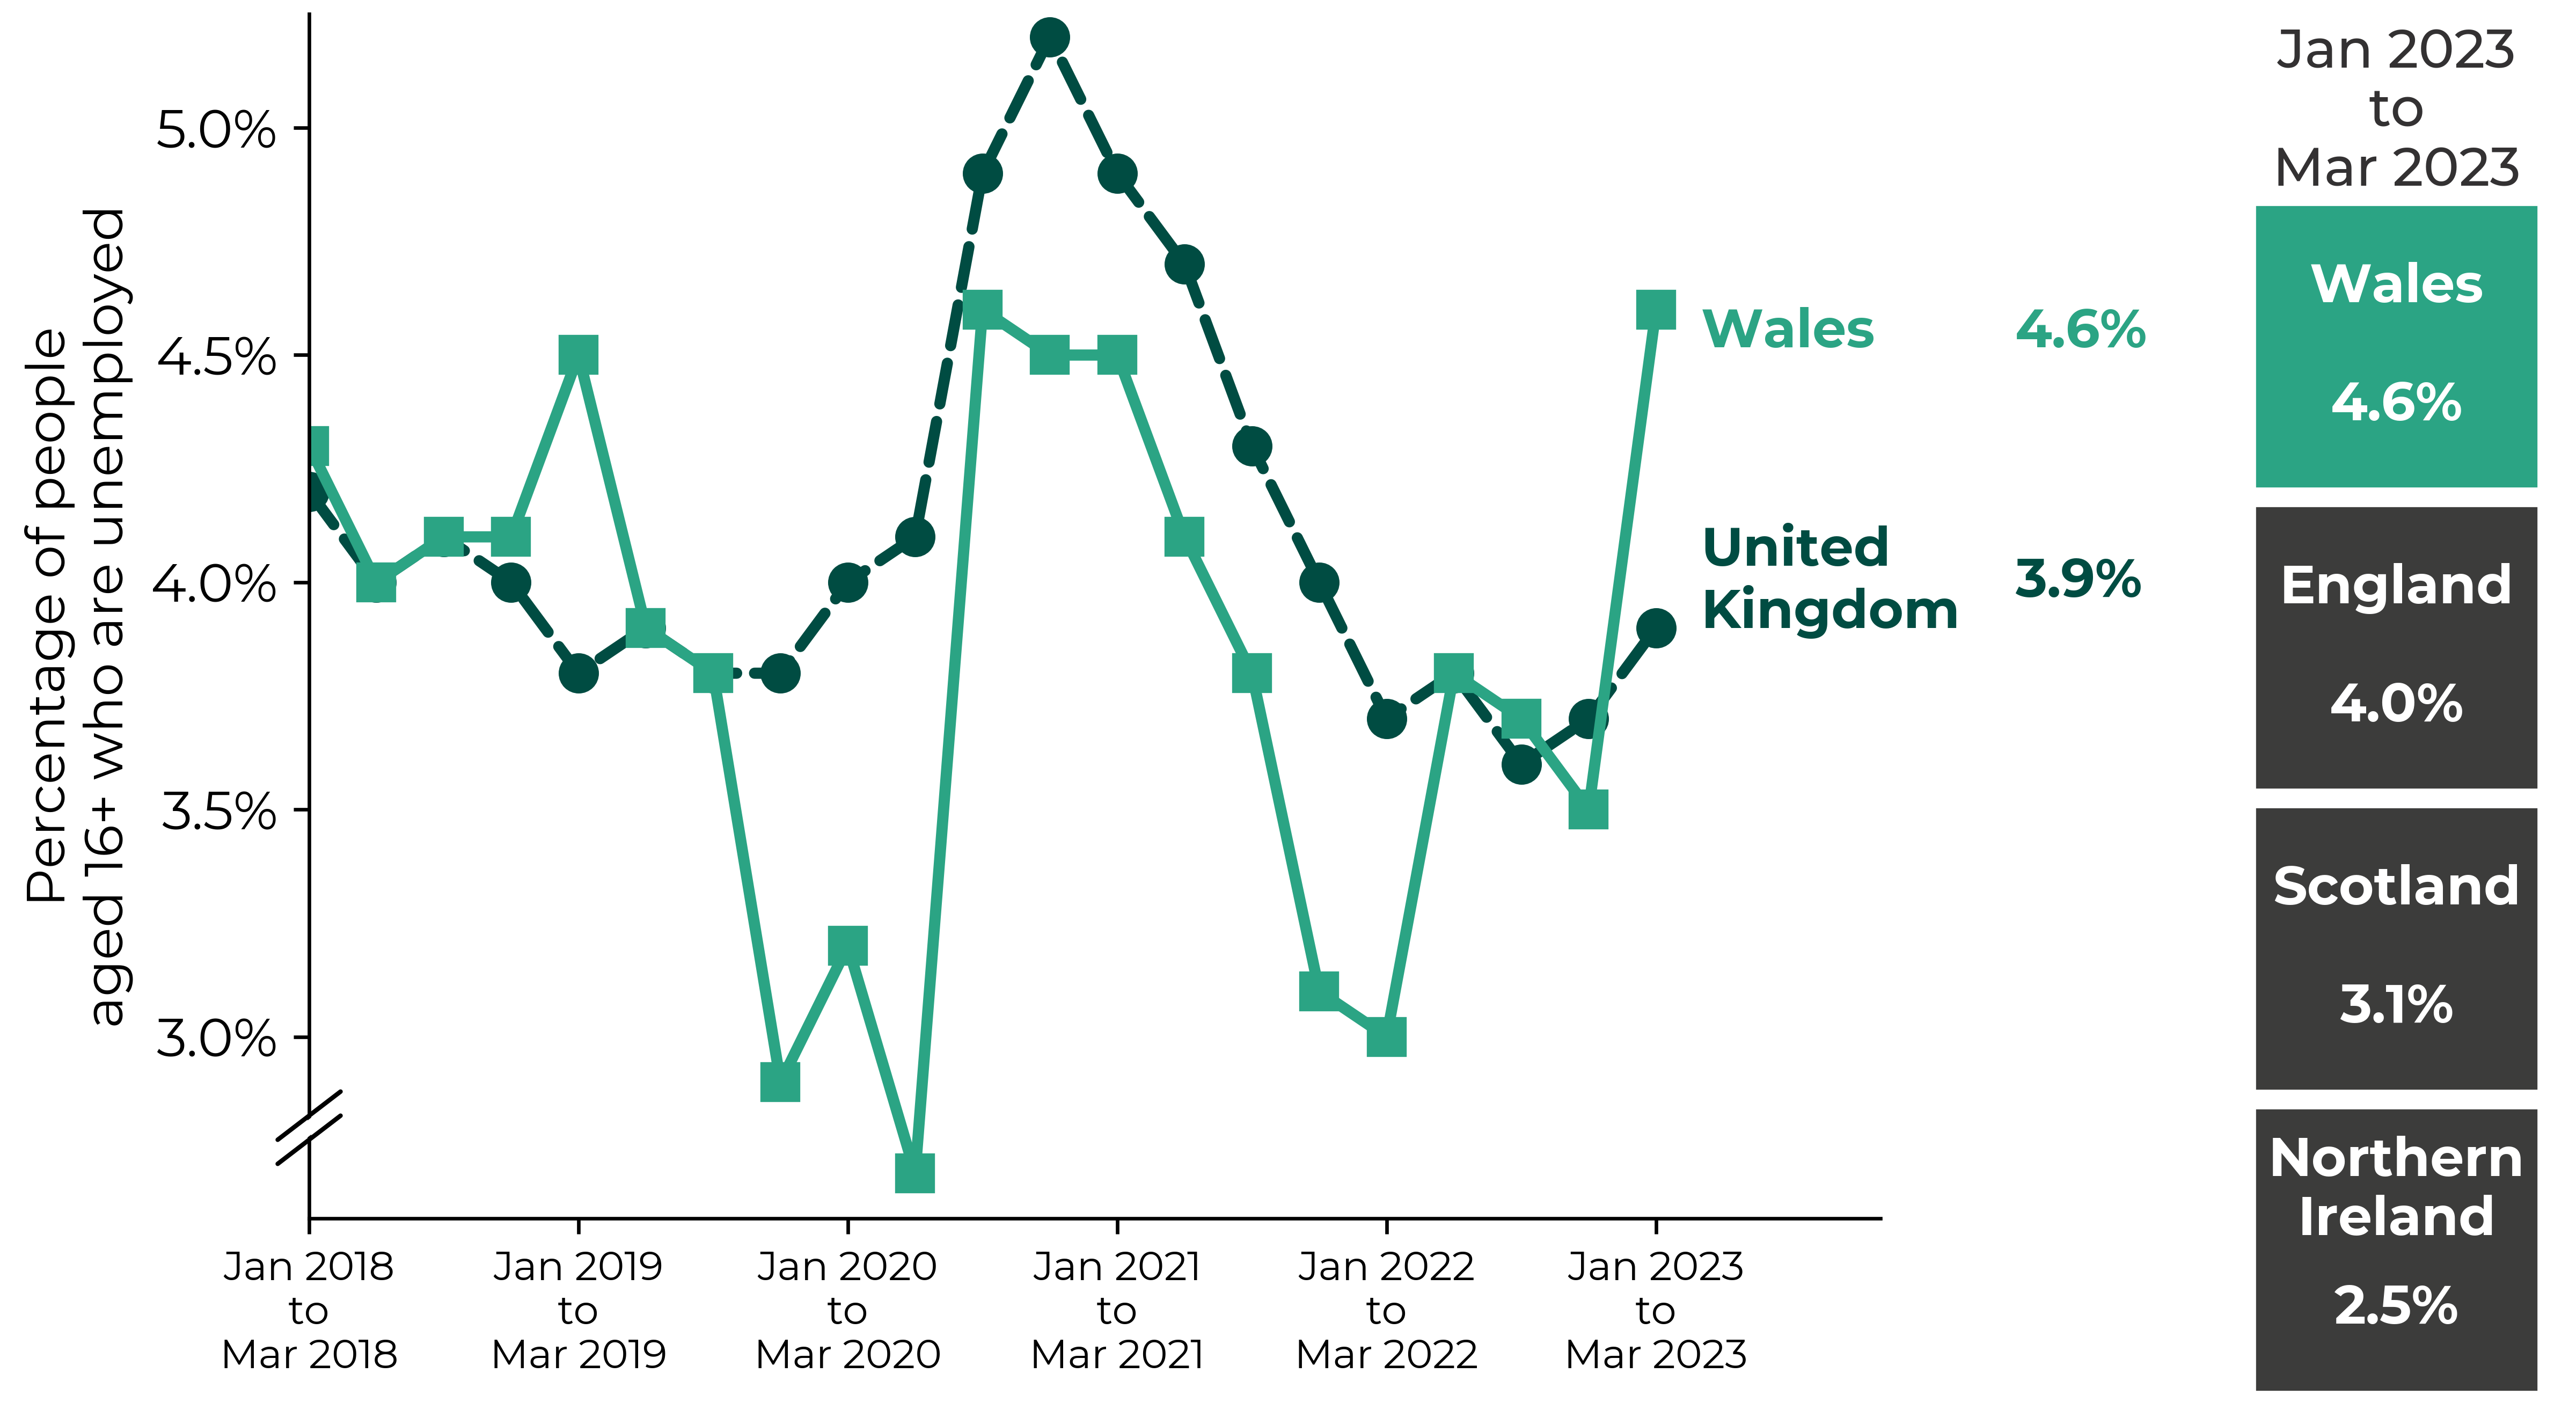 Graph showing an overall decrease in Wales' unemployment rate from over 4% in 2018 to under 3% in early 2020. This was followed by a peak of almost 5% during 2021 and returning to around 3% by 2022. UK unemployment rate followed a similar pattern. Figures for the latest period (January 2023 to March 2023) are Northern Ireland 2.5%, Scotland 3.1%, England 4.0%, Wales 4.6%  and UK 3.9%.